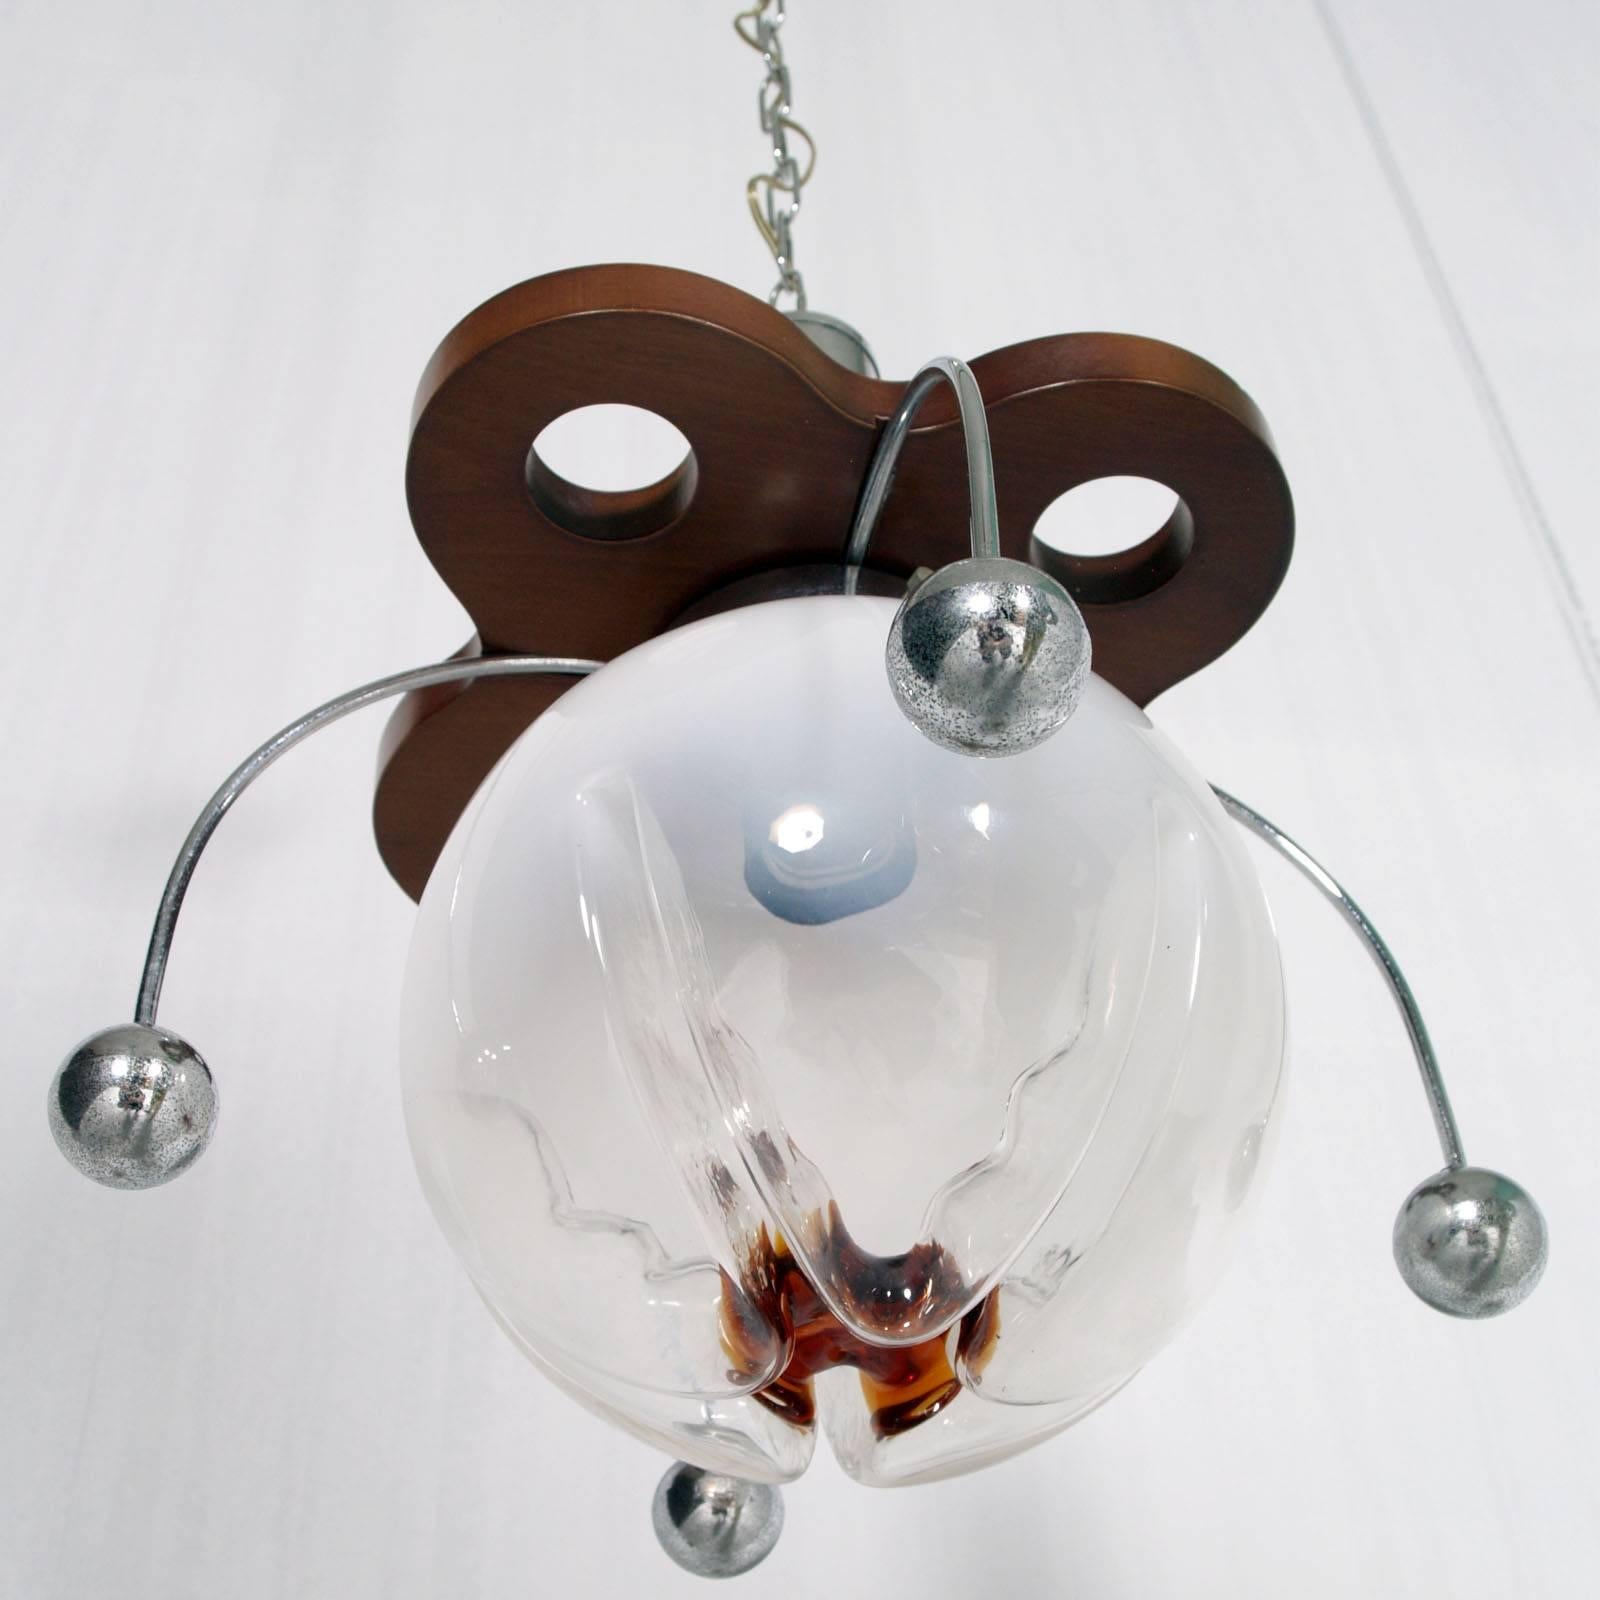 Ceiling lamp in the manner Italian designer Gaetano Sciolari. Wood and chrome-plated metal structure, with four arms as electrons with Murano glass globes. Manufactured by Mazzega Glass Factory (1929-1983) in the 1960s. Good condition with electric